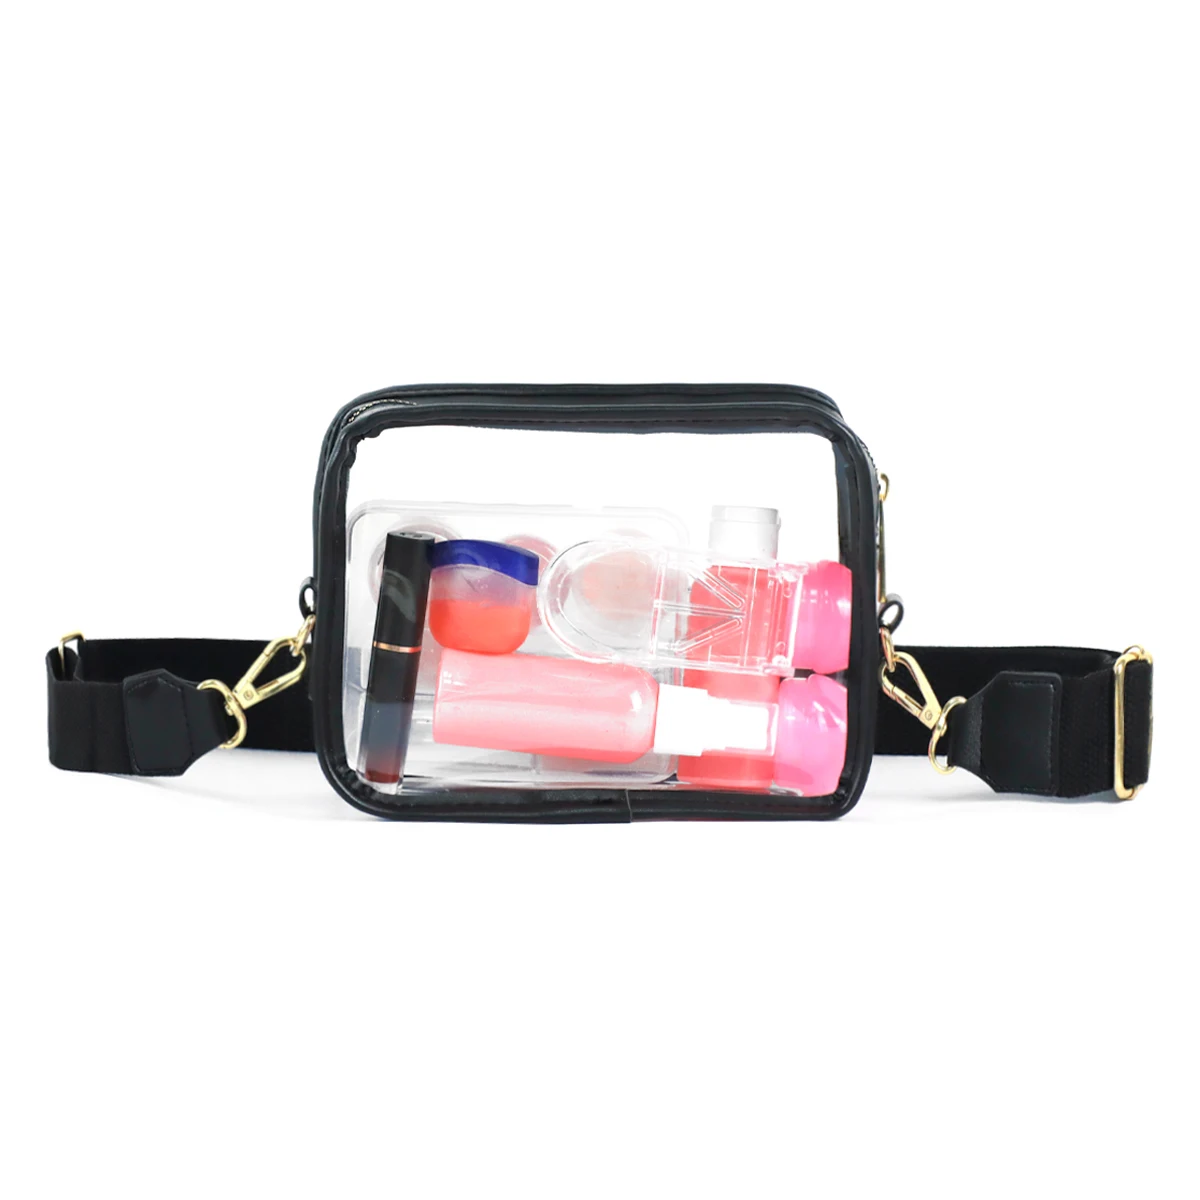 PVC Bag Transparent Envelope Fanny Pack Stadium Approved Clear Purse Bag for Concerts Sports Events